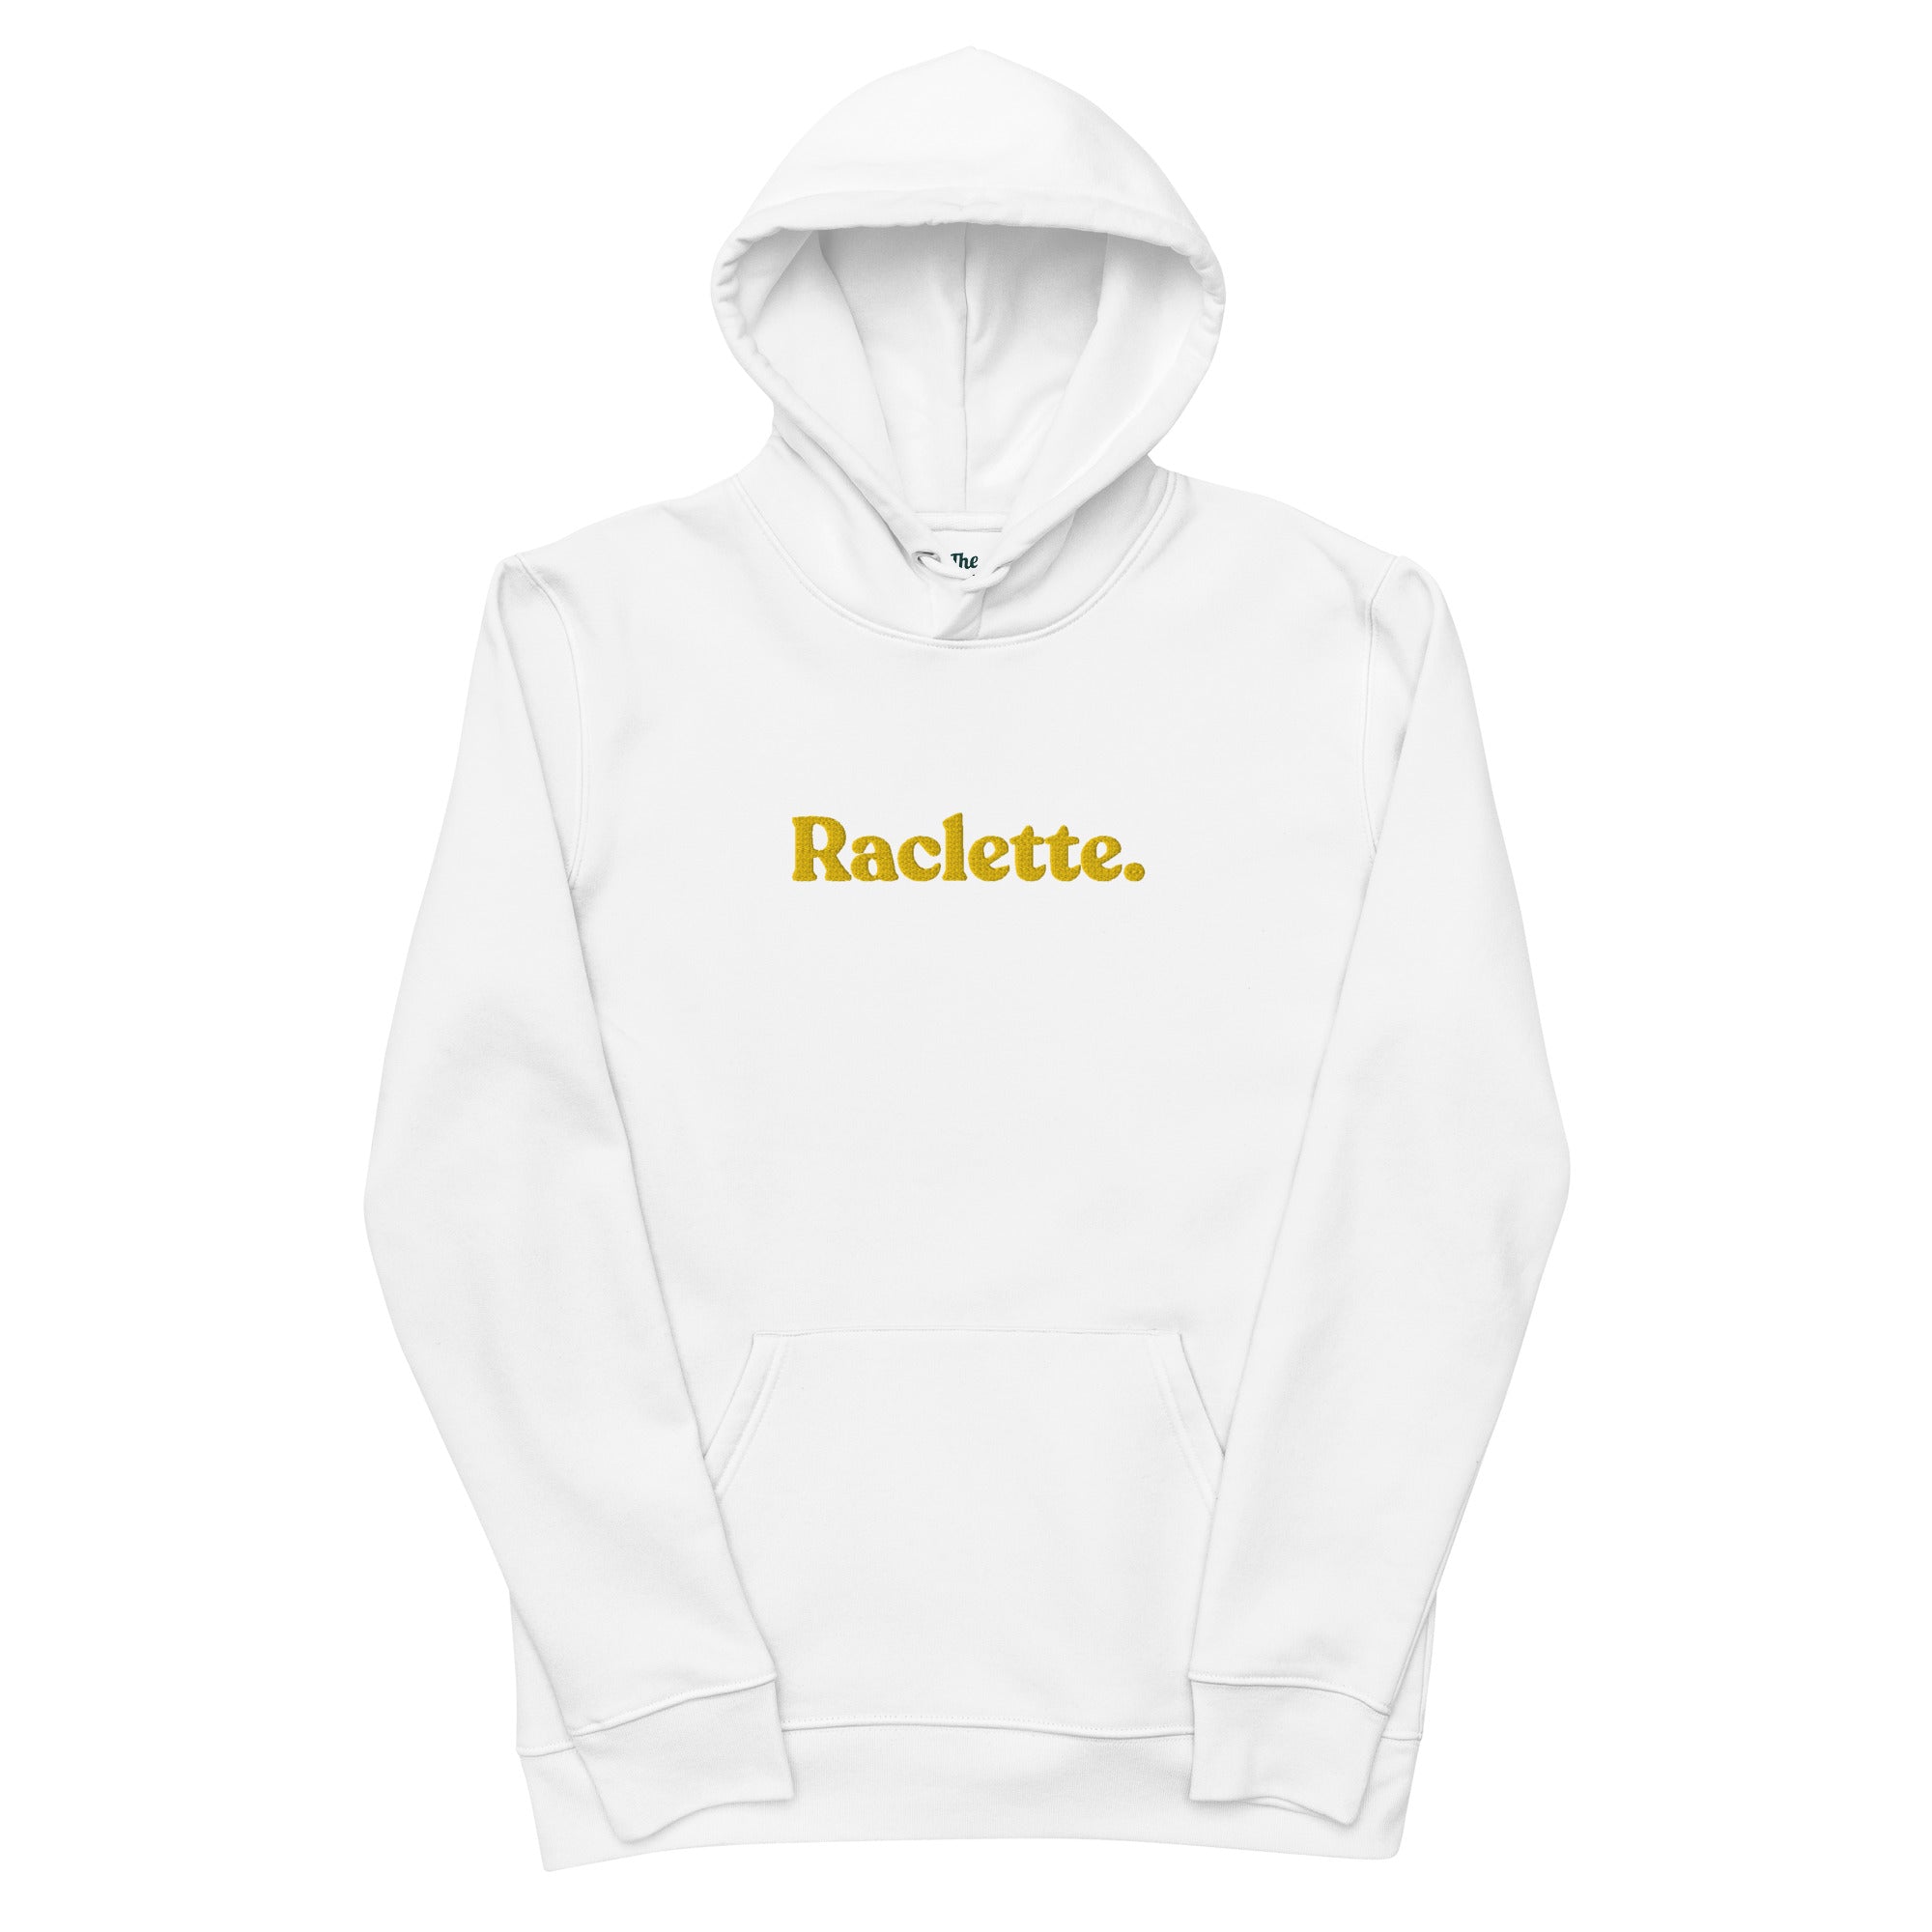 Raclette - Organic Embroidered Hoodie - The Refined Spirit